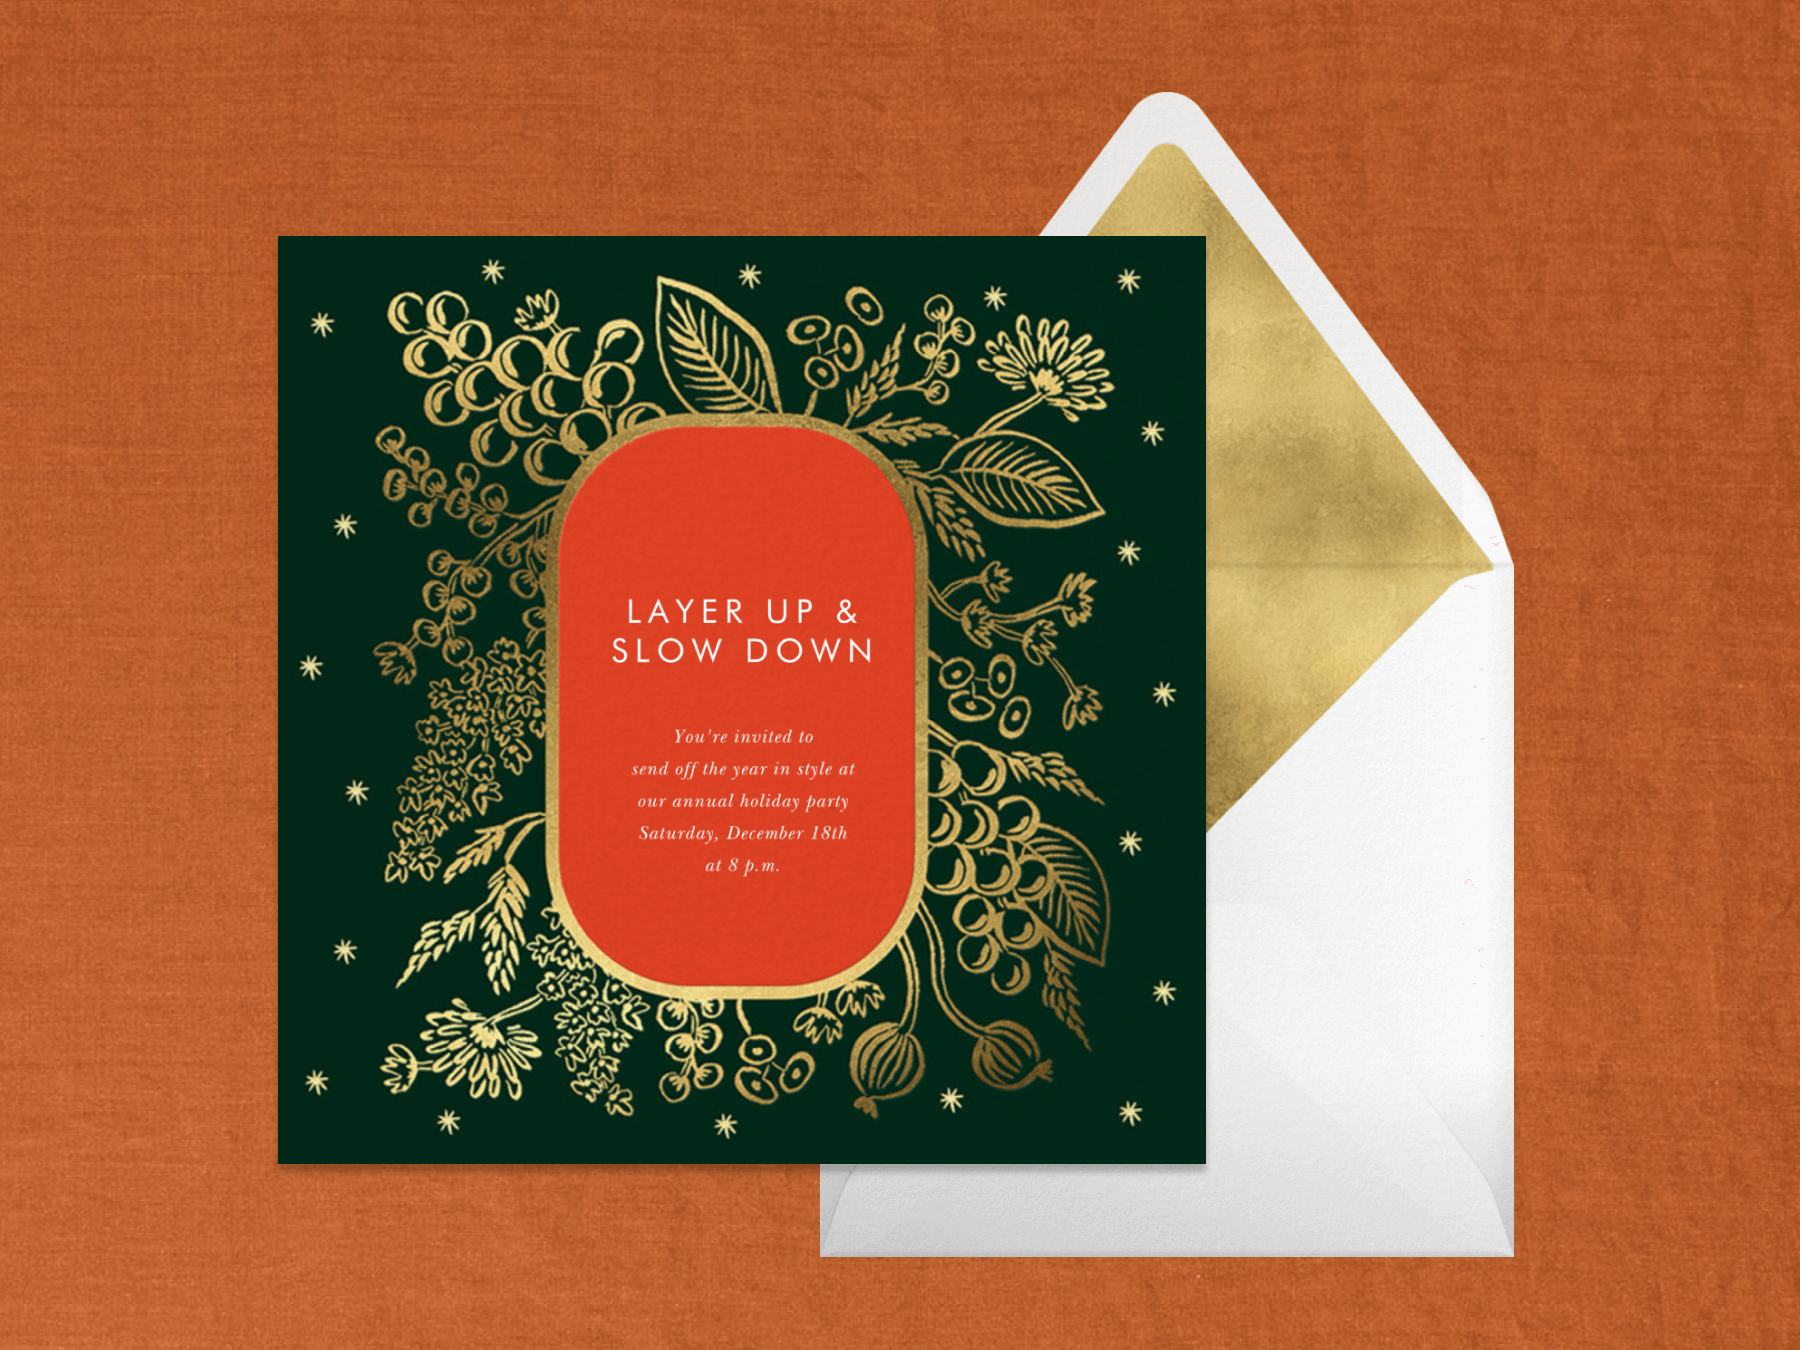 A dark green holiday party invitation with a red squoval in the center surrounded by gold grapes, leaves, and flowers.